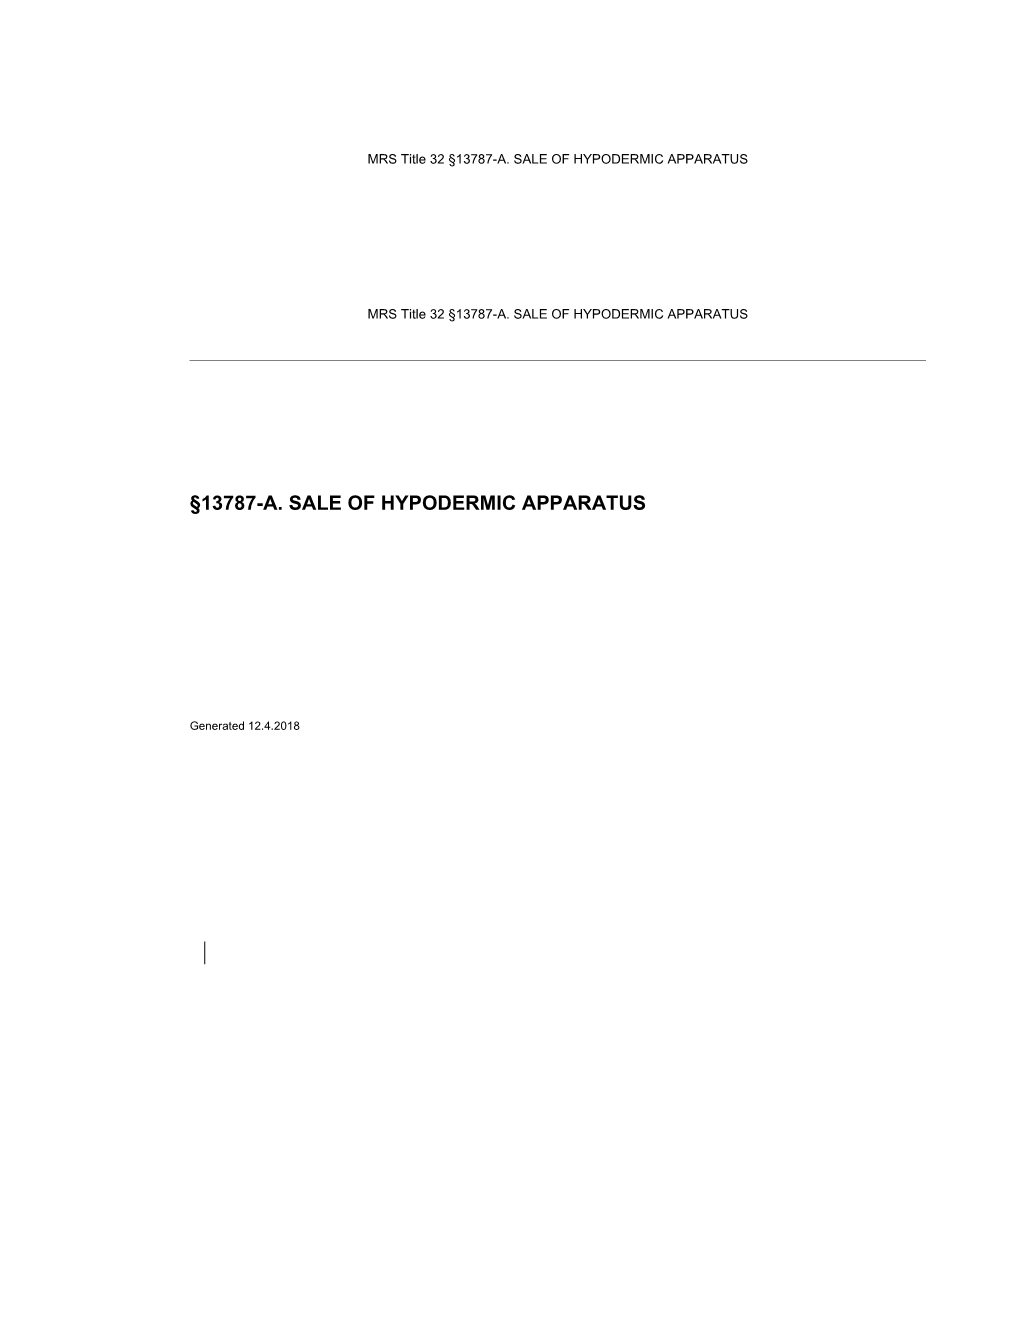 MRS Title 32 13787-A. SALE of HYPODERMIC APPARATUS